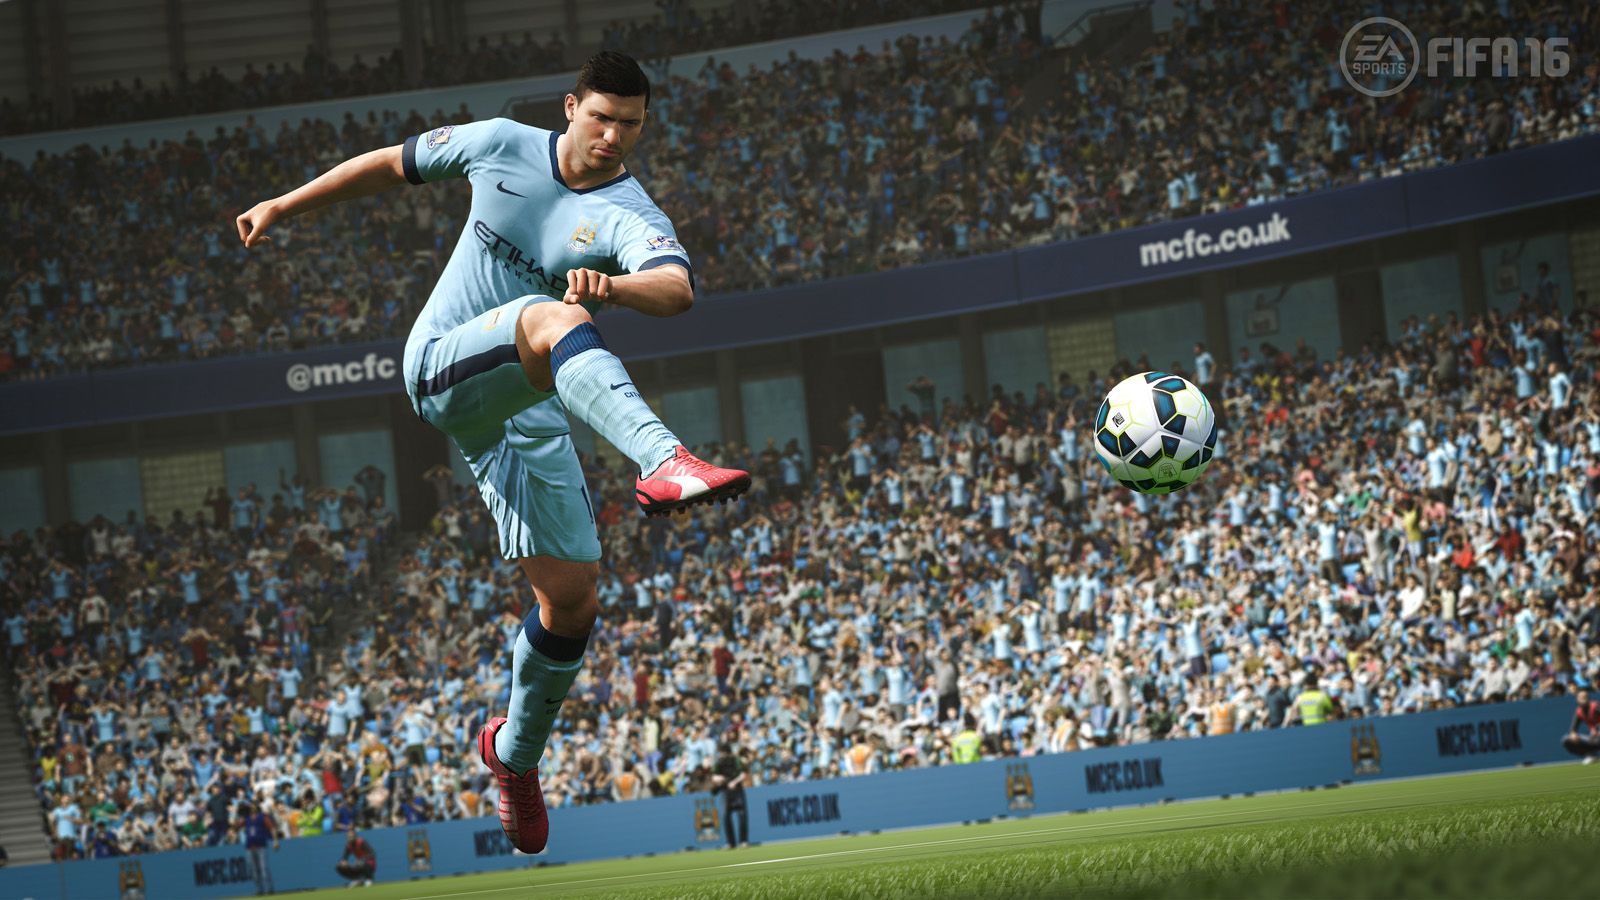 fifa 16 preview image 1